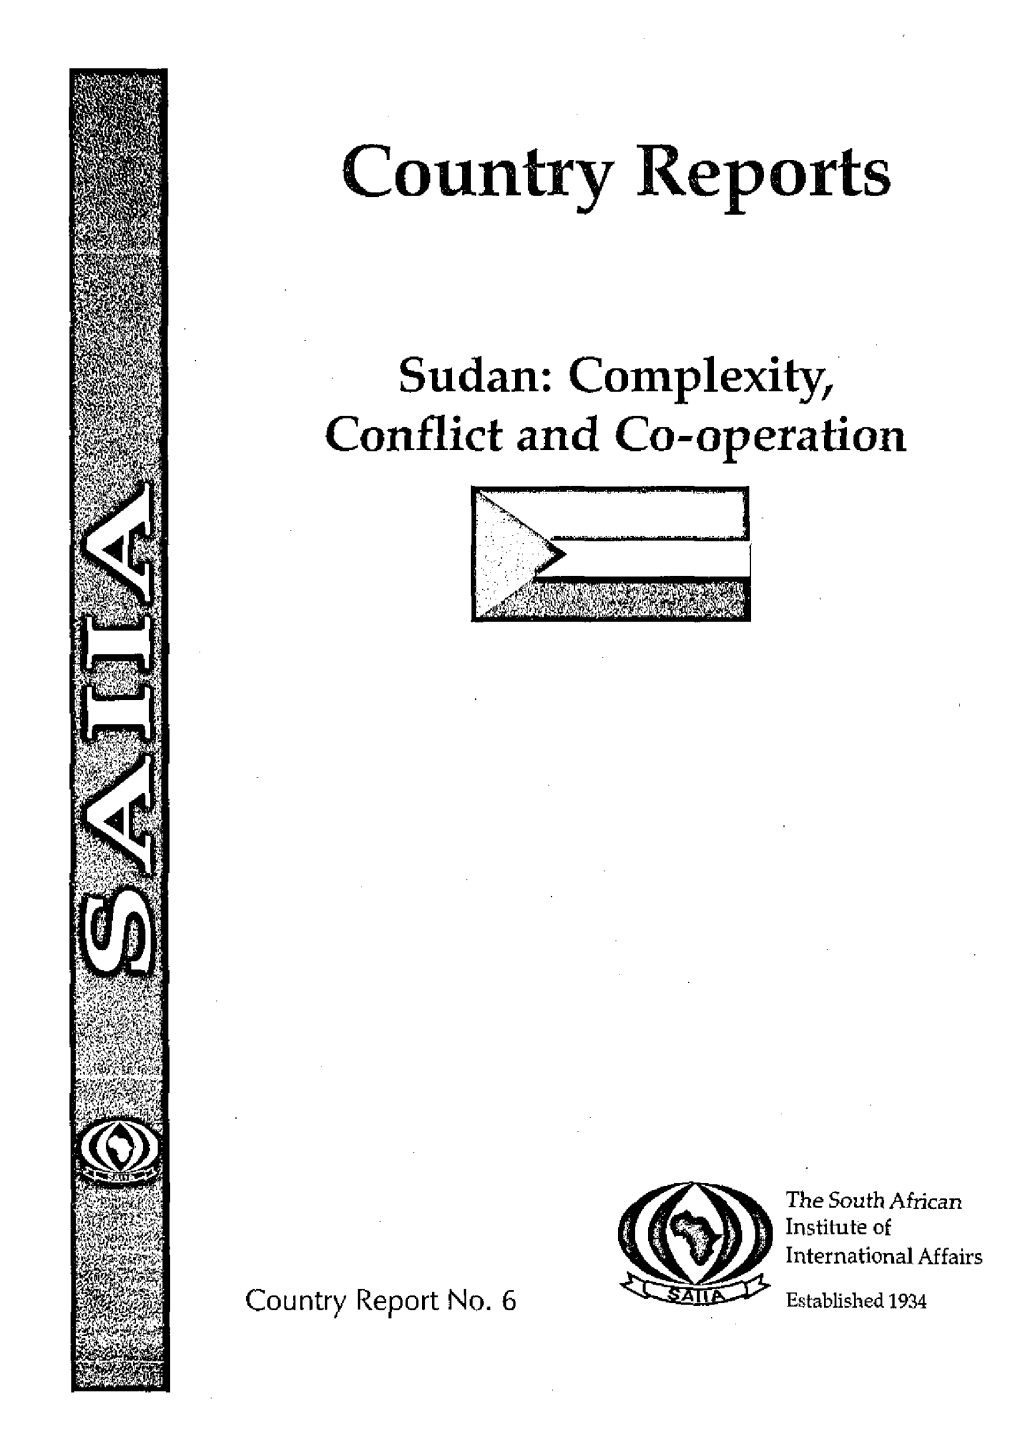 Sudan: Complexity, Conflict and Co-Operation